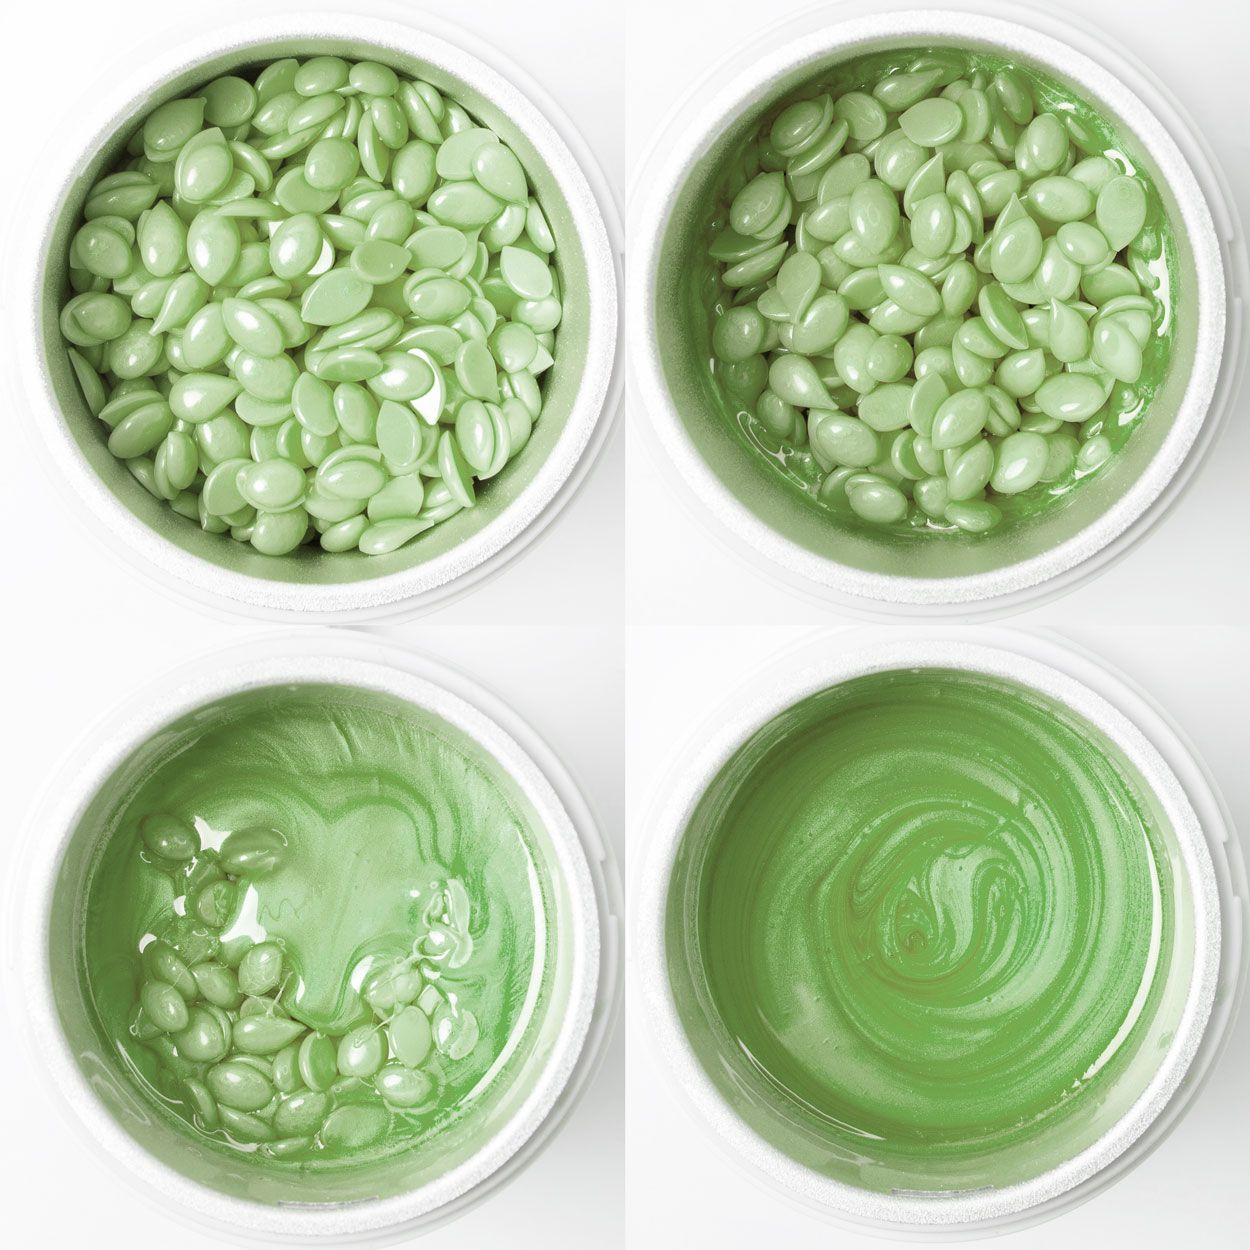 various stages of melting process of green tea Premium hard wax beads 